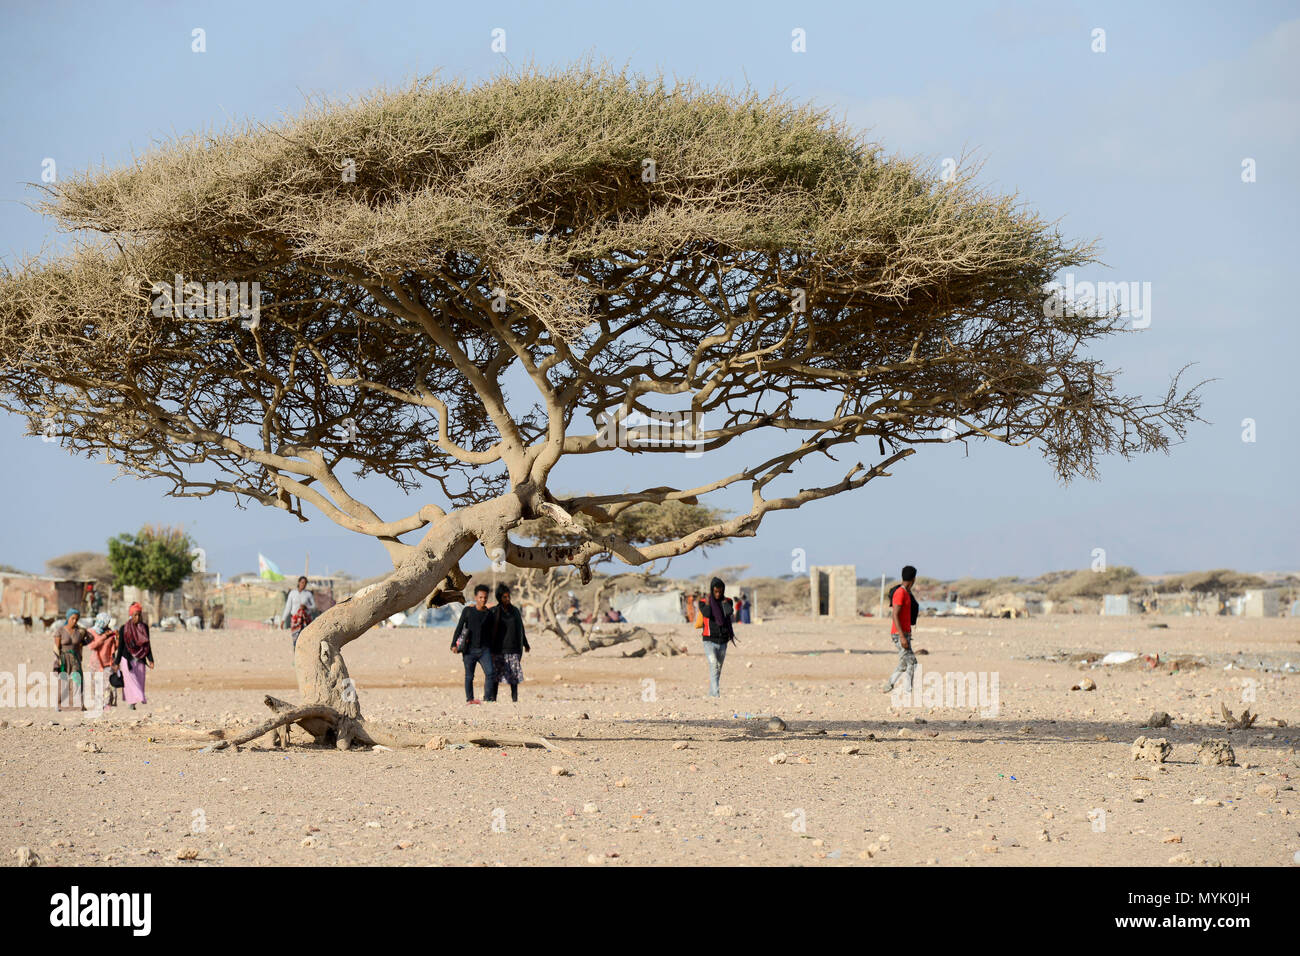 DJIBOUTI , Obock, from here ethiopian migrants try to cross bab el mandeb, red sea, gulf of aden by smuggler boats to Yemen to continue the journey to Saudi Arabia or Europe, group of ethiopian migrants going to the meeting point with the smugglers, acacia tree Stock Photo